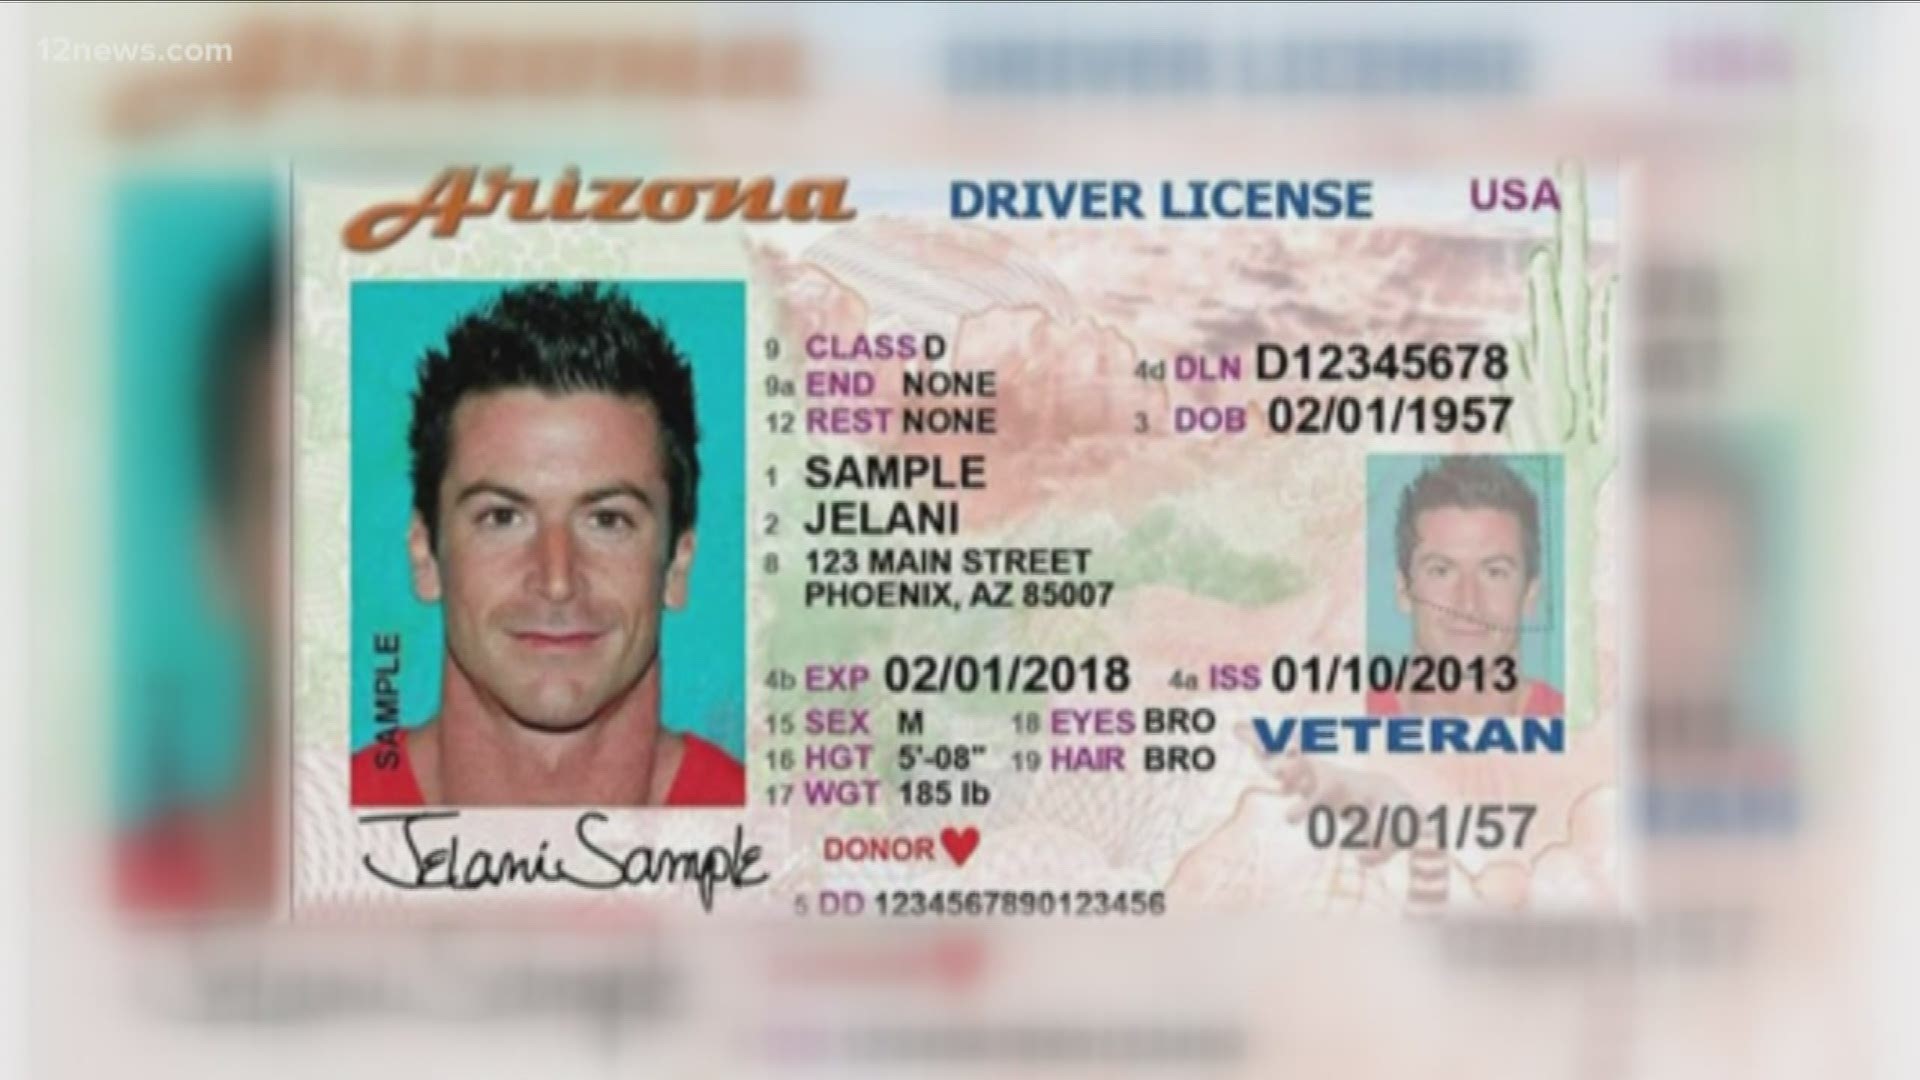 The Real ID program is federal law, so to be in compliance there's the Arizona travel ID. The deadline to get one is Oct. 1, 2020.